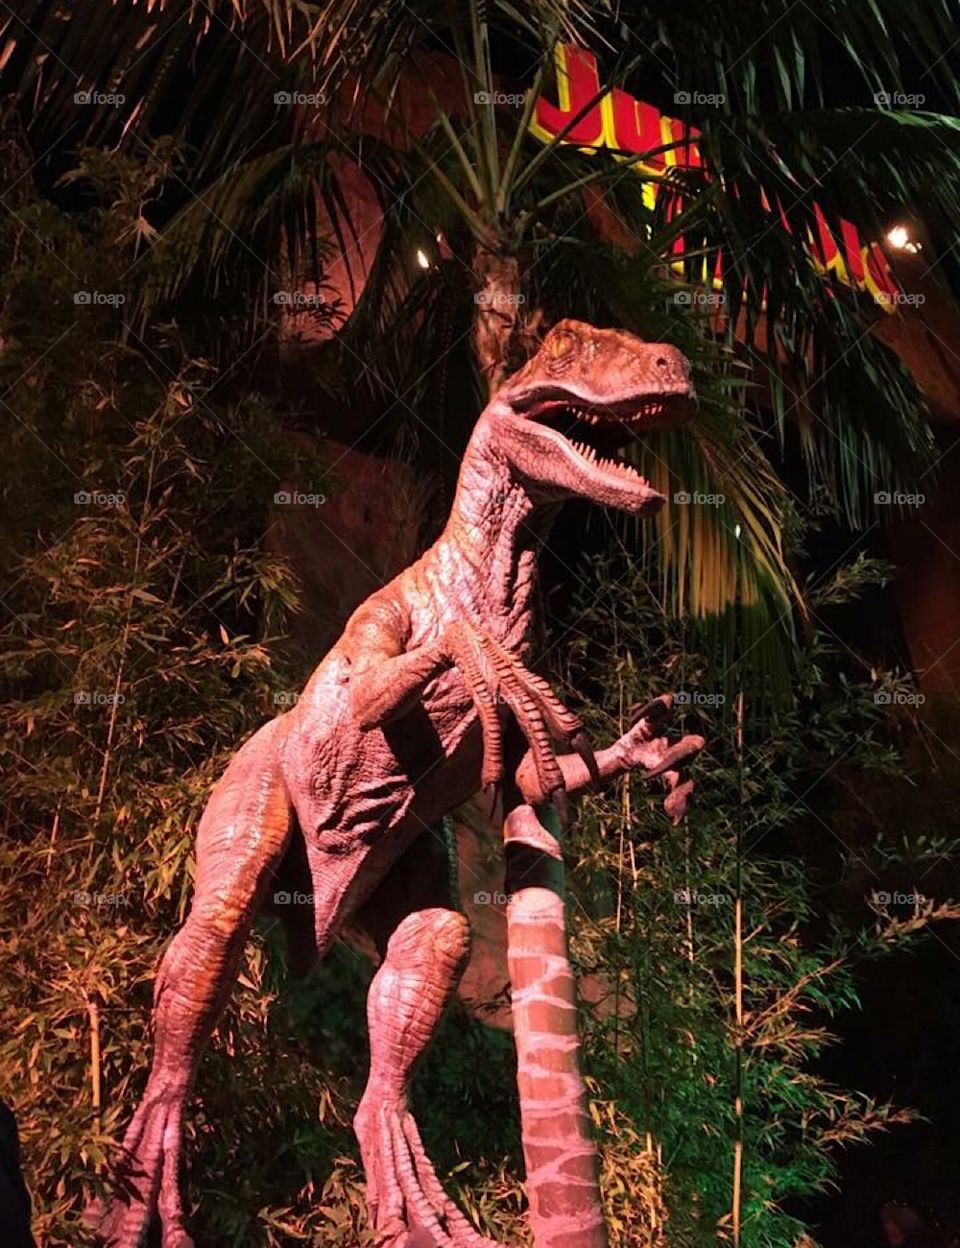 Raptor statue at Universal Studios Hollywood in the Jurassic Park section in California.